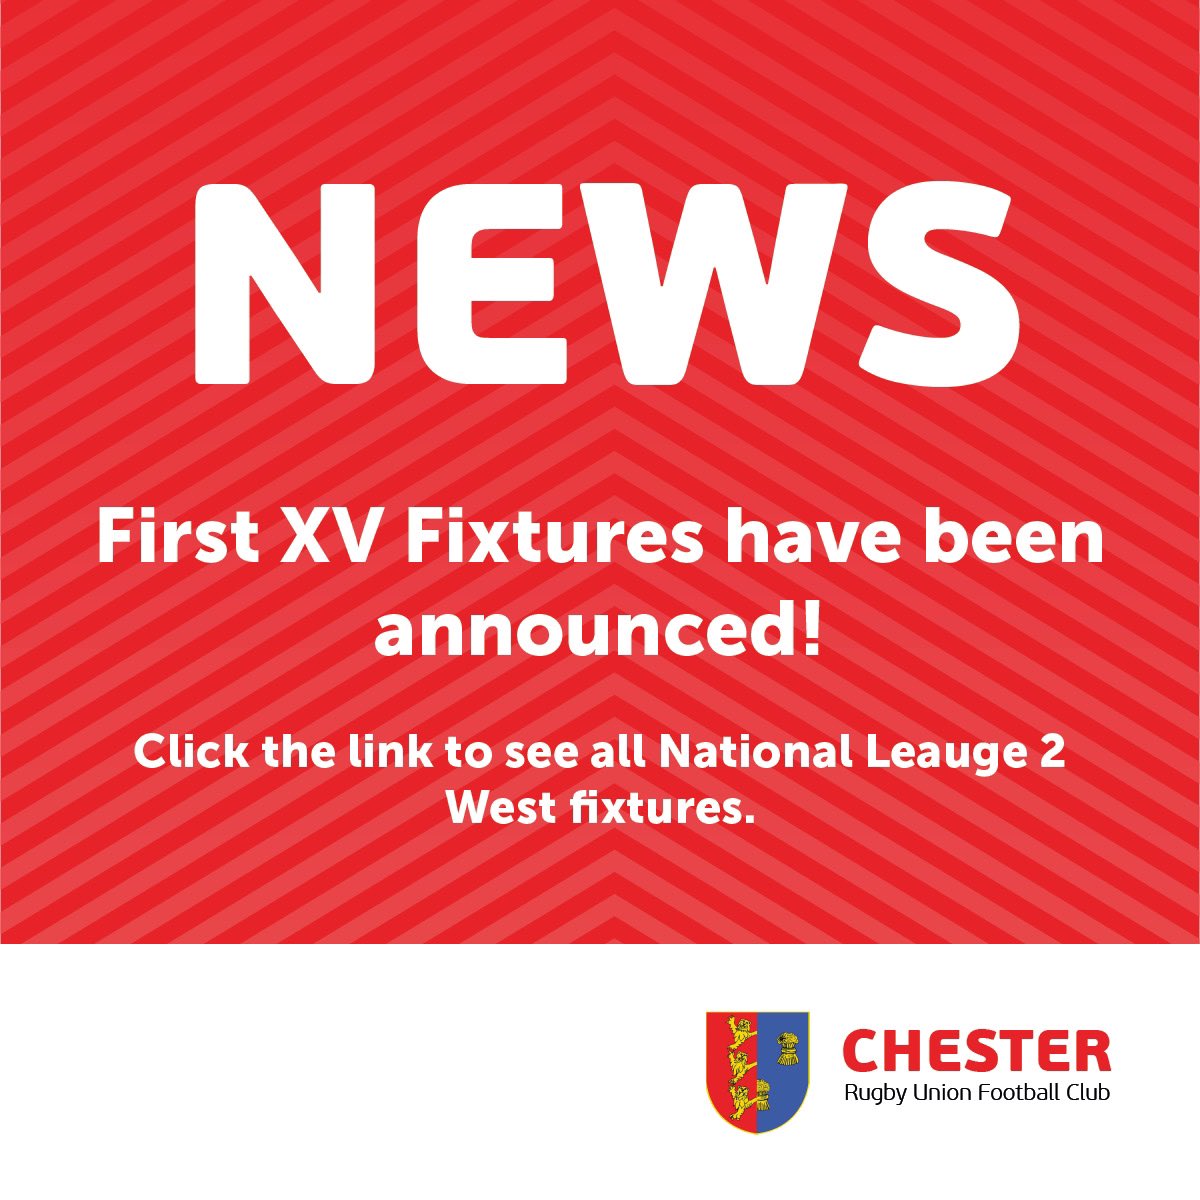 Click the link below to see all the National League 2 West Fixtures:

englandrugby.com/fixtures-and-r…

#chester #rufc #rugbyunion #rugbylife #rugbyplayer #rugbyfamily #rugbylove #rugby

@Natleague_rugby